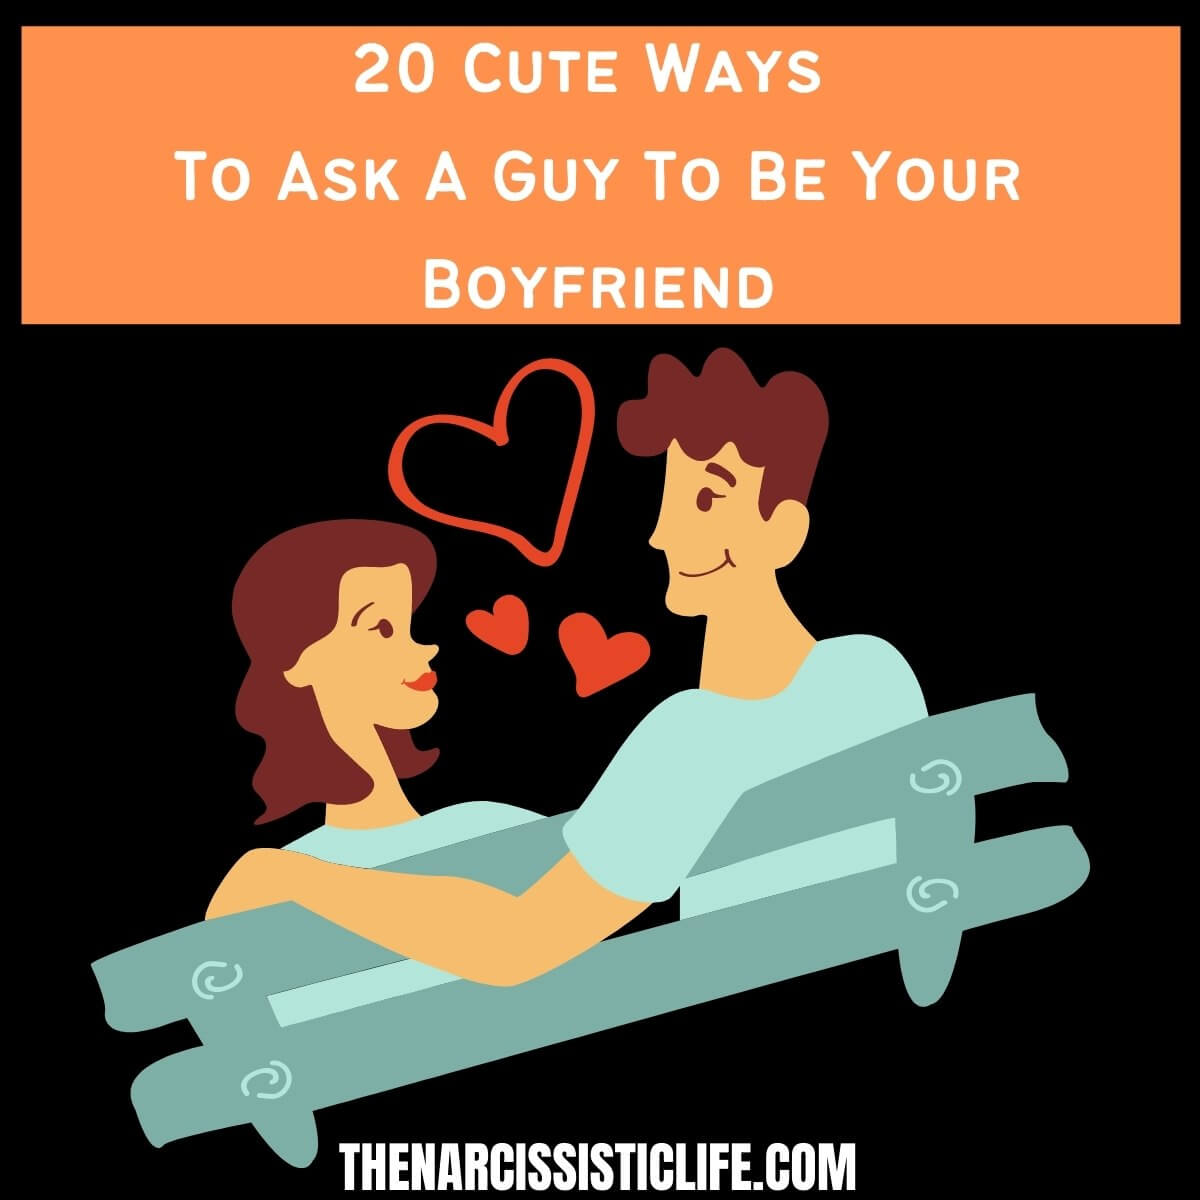 20 Cute Ways To Ask A Guy To Be Your Boyfriend - The Narcissistic Life